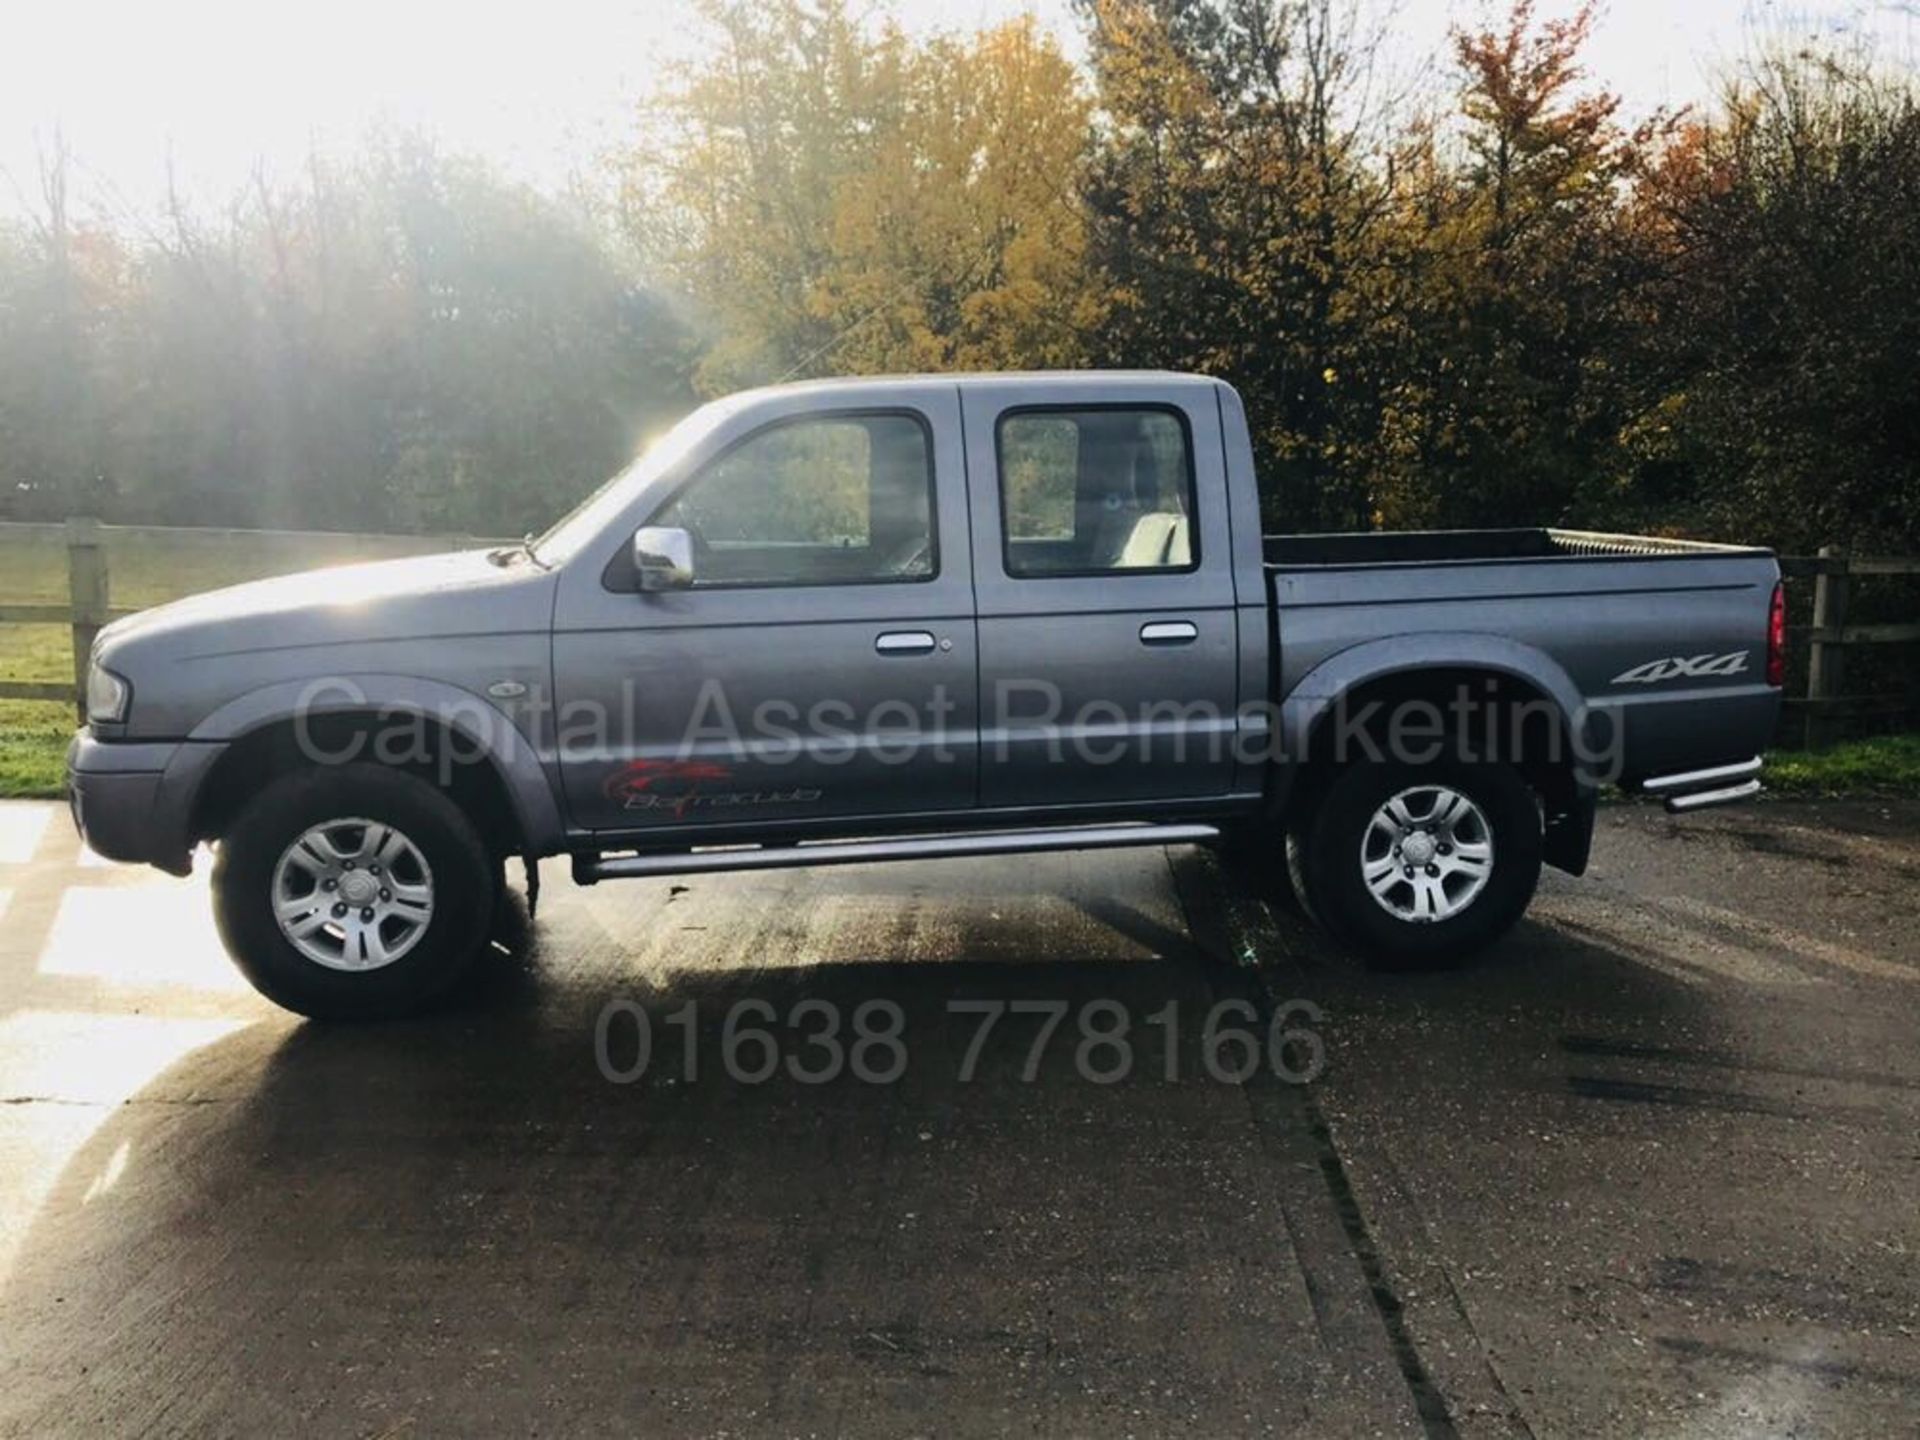 MAZDA B2500 '4-STYLE DOUBLE CAB PICK-UP' (2006 - 06 REG) '2.5 DIESEL - 109 BHP' *AIR CON* (NO VAT) - Image 4 of 18